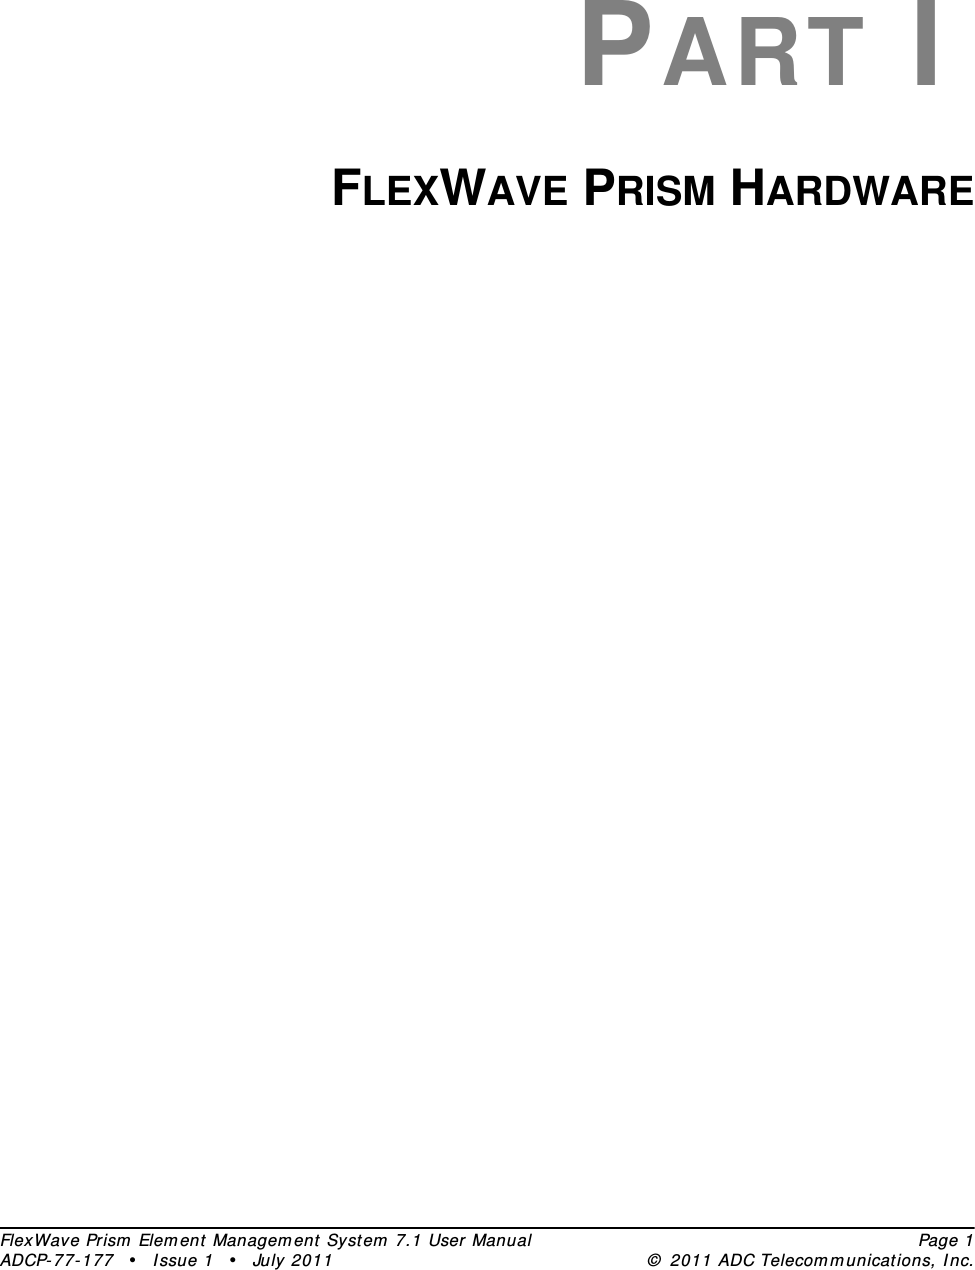 FlexWave Prism Element Management System 7.1 User Manual Page 1ADCP-77-177 • Issue 1 • July 2011 © 2011 ADC Telecommunications, Inc.PART IFLEXWAVE PRISM HARDWARE